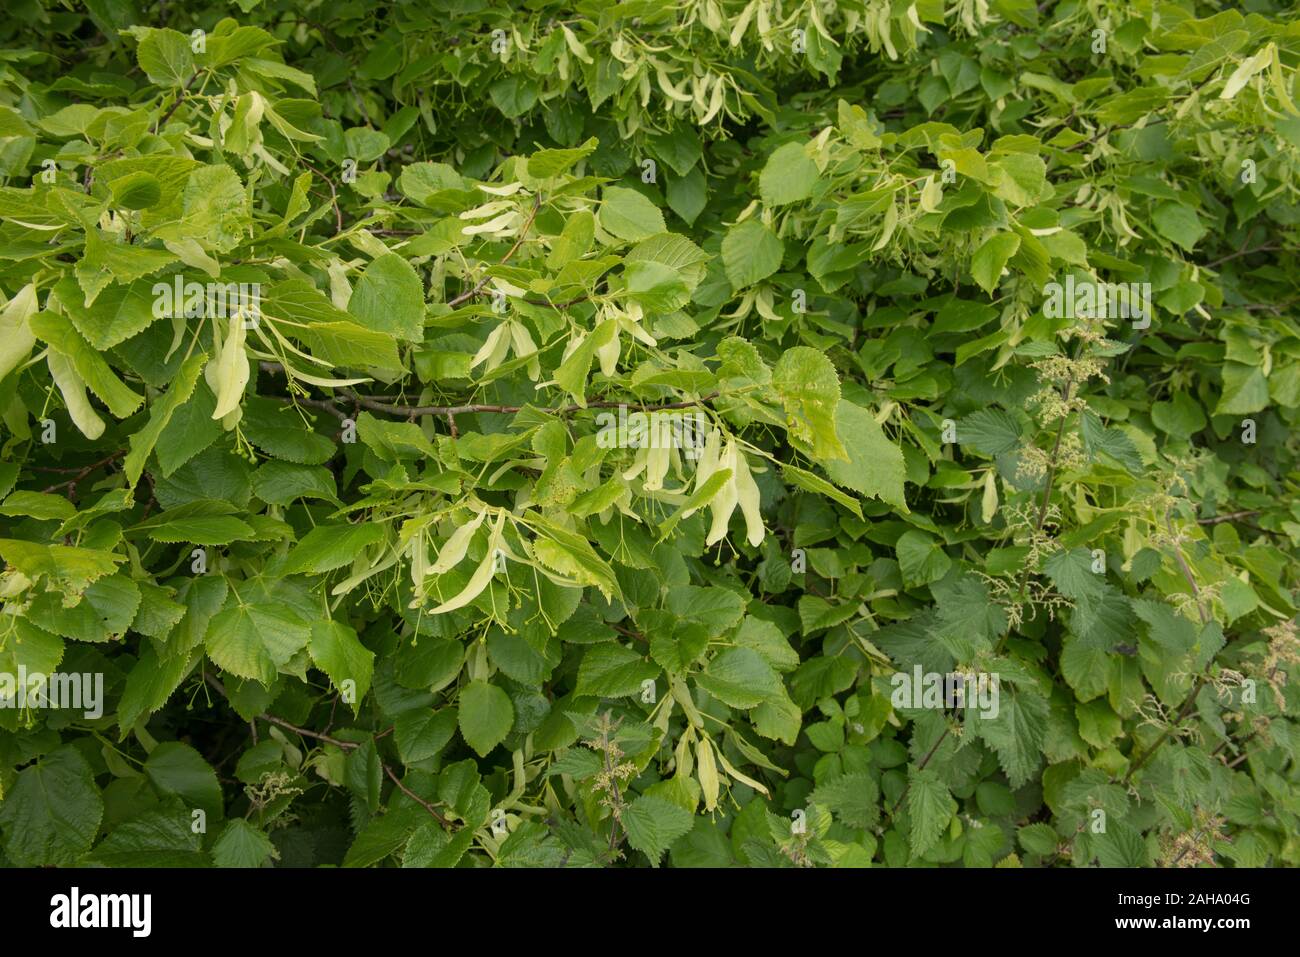 Summer Foliage and Flowers of a Common Linden or Common Lime Tree (Tilia x europaea) in a Park in Rural England, UK Stock Photo